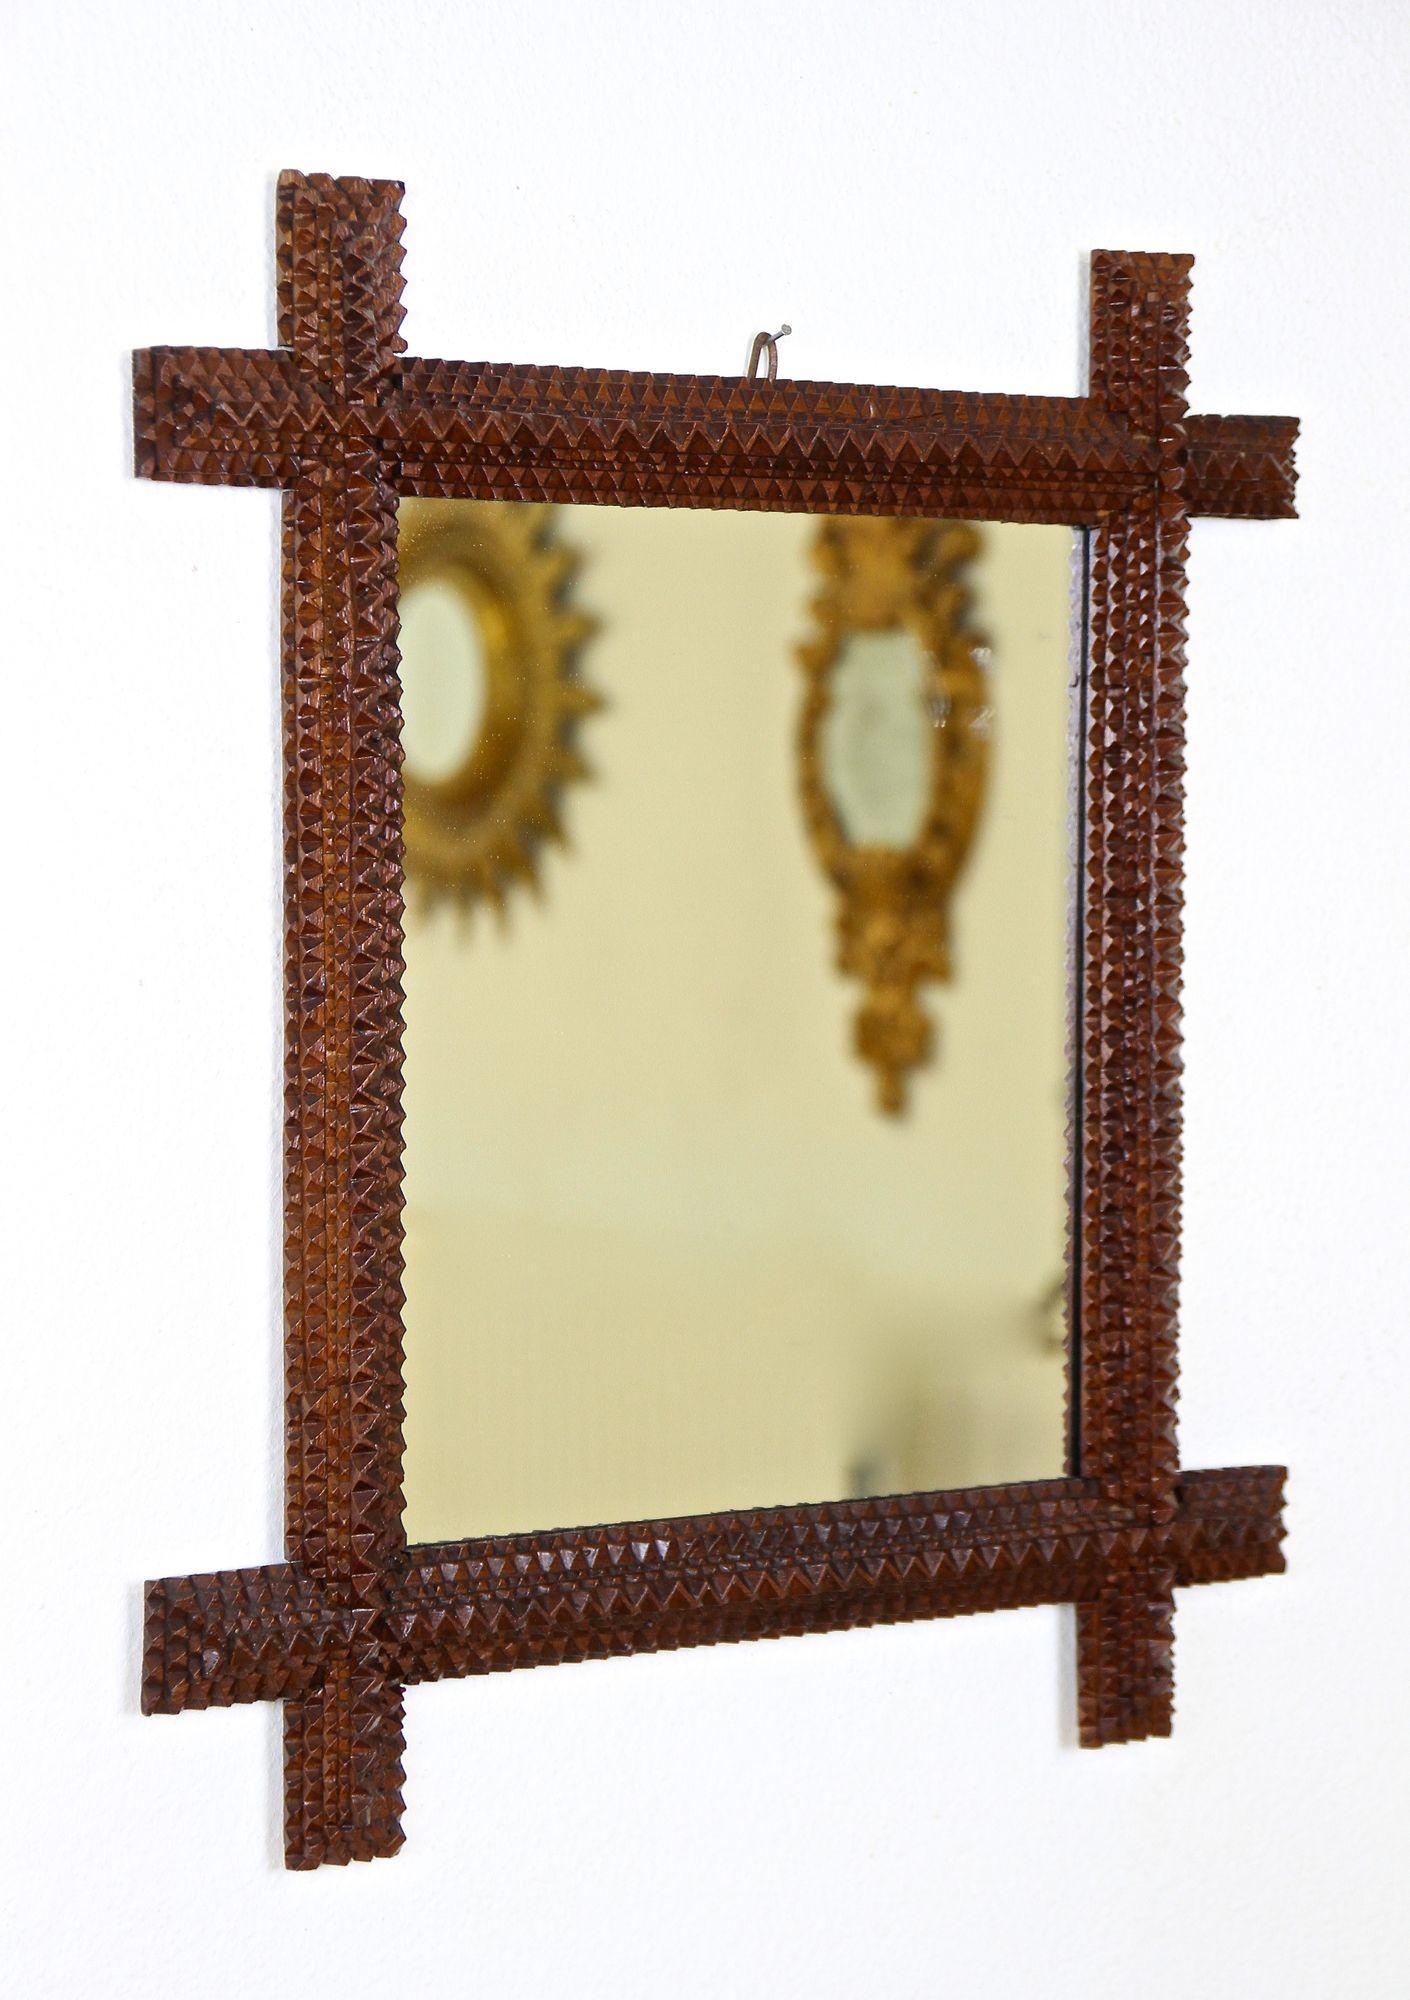 Charming rustic Tramp Art wall mirror from the period around 1880 in Austria. This unique carved wooden mirror has been artfully handcrafted in the late 19th century out of basswood and shows a lovely brown surface finished with a satin gloss